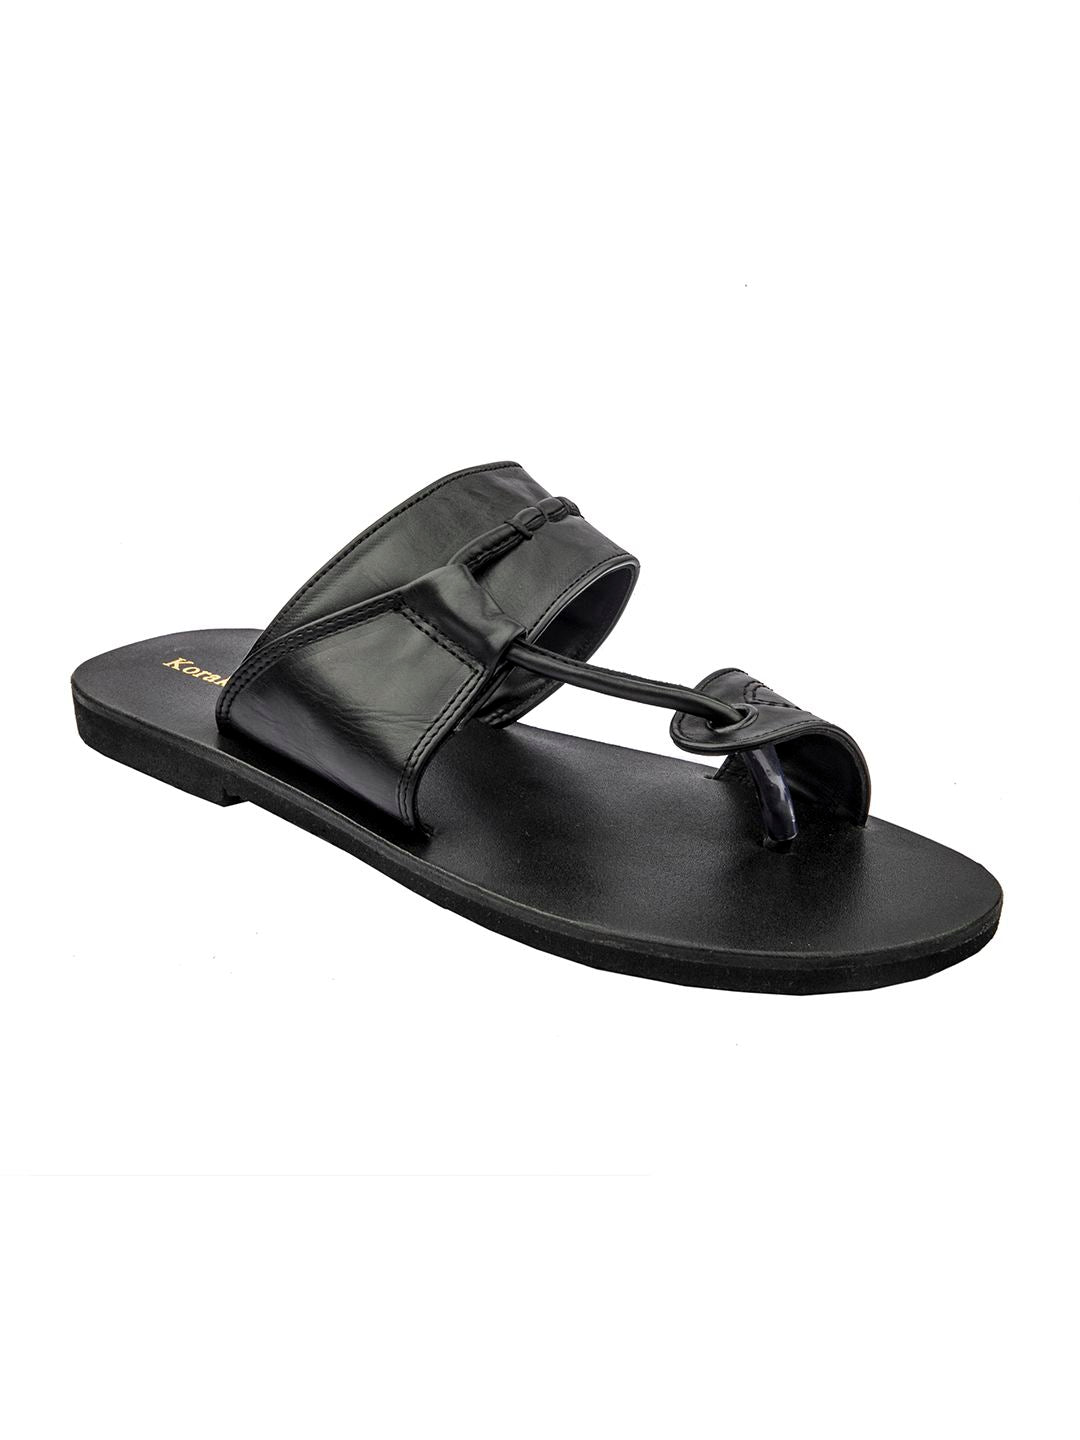 Men's Faux Leather Slipper Flat Chappal Thong Sandal For Daily Outdoor  Indoor Use Formal Office Home at Rs 170/pair | Synthetic, Faux Leather  Slipper 2 in New Delhi | ID: 2850808030155